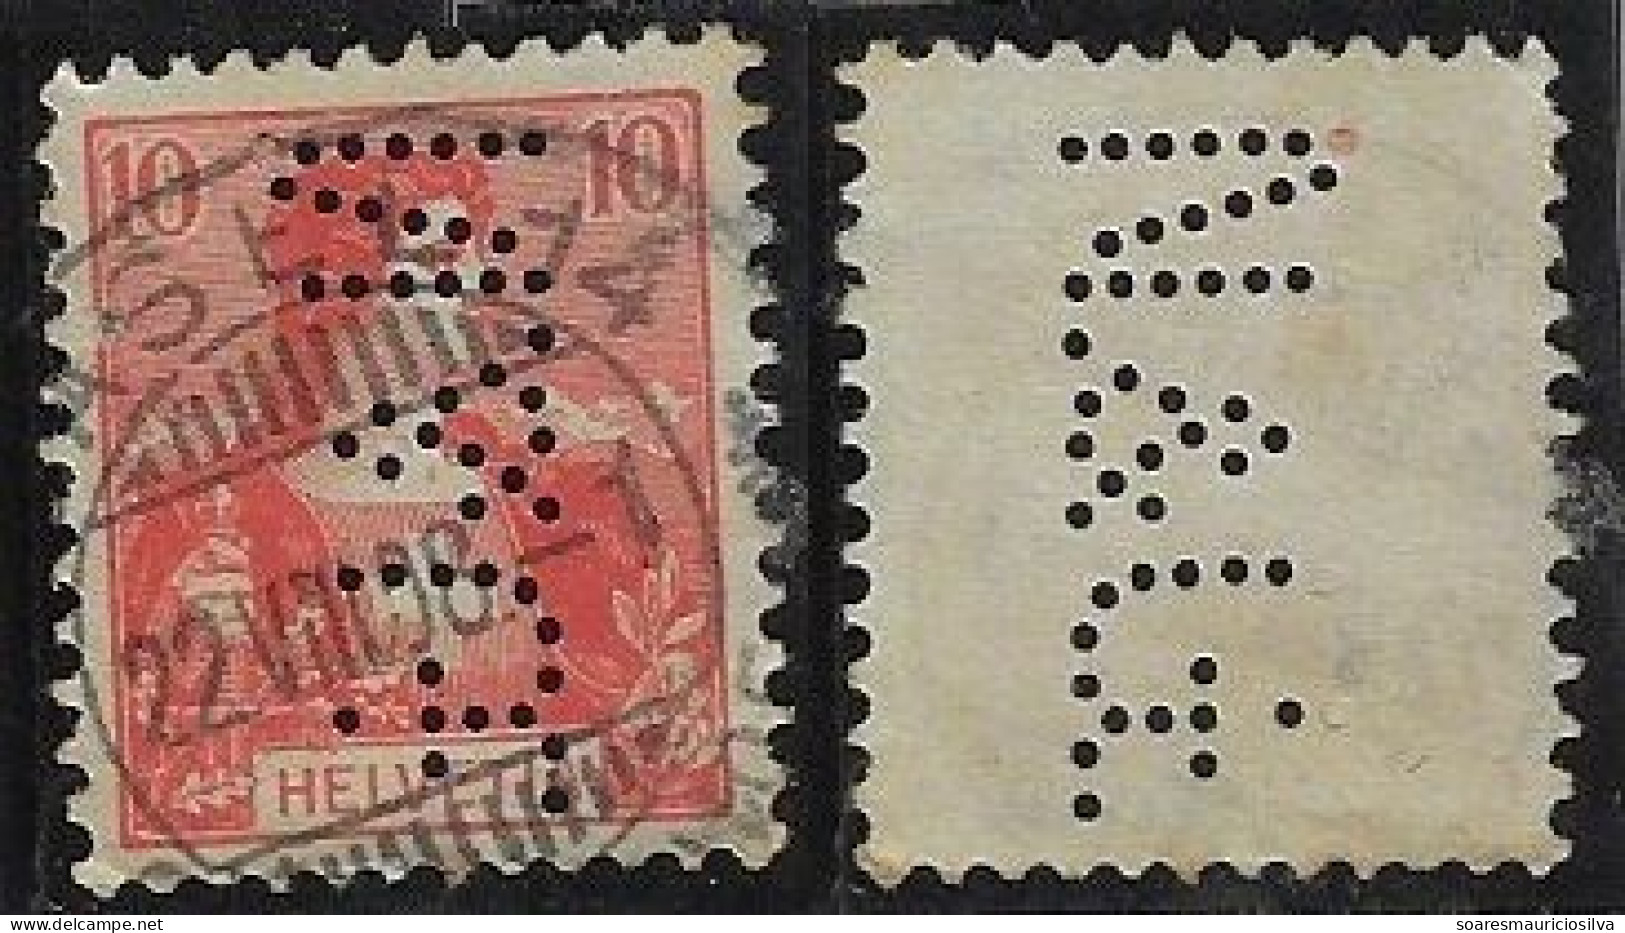 Switzerland 1905/1919 Stamp With Perfin N.&G. By Niebergall & Goth International Transport From Basel Lochung Perfore - Perforés